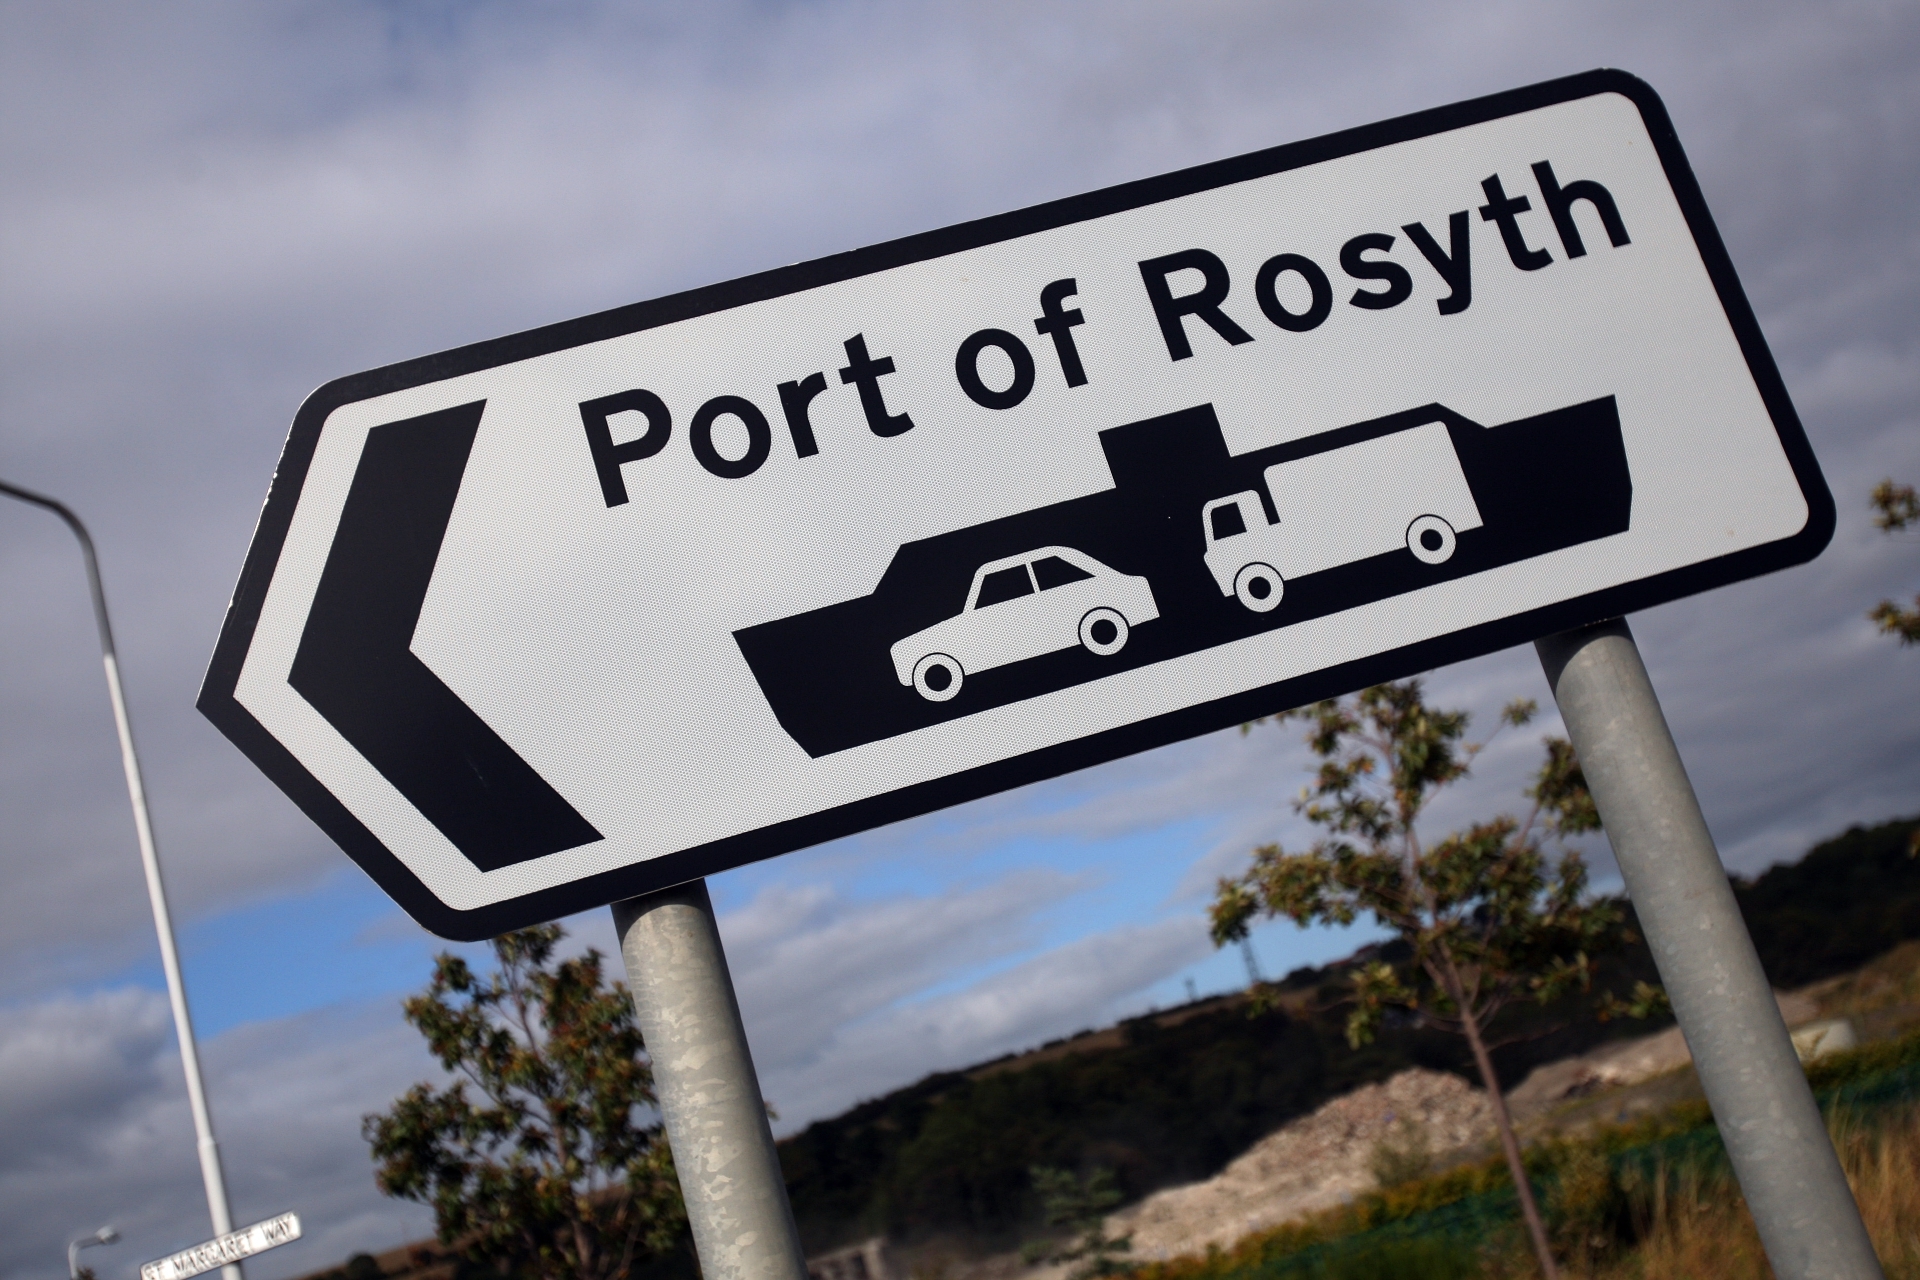 Kris Miller, Courier, 01/09/14. Picture today shows sign for Port of Rosyth for story about European freight ferry being stopped due to new legislation. Rosyth Ferry Port, Rosyth Europarc